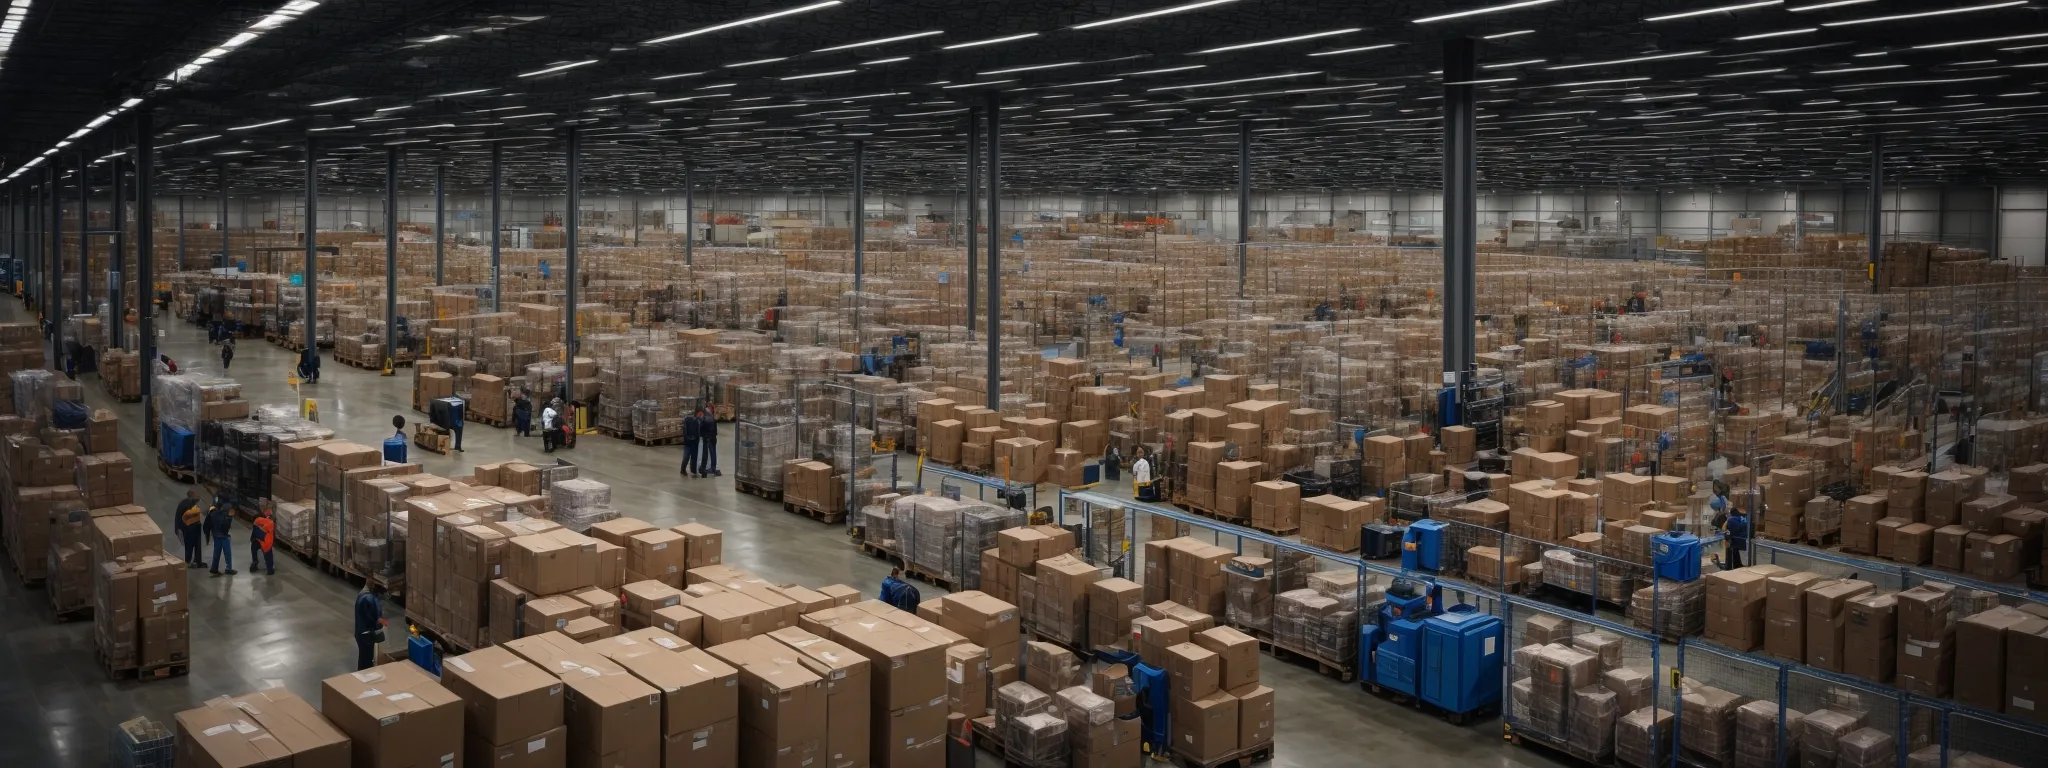 a bustling amazon warehouse with bins full of products and busy workers fulfilling online orders.